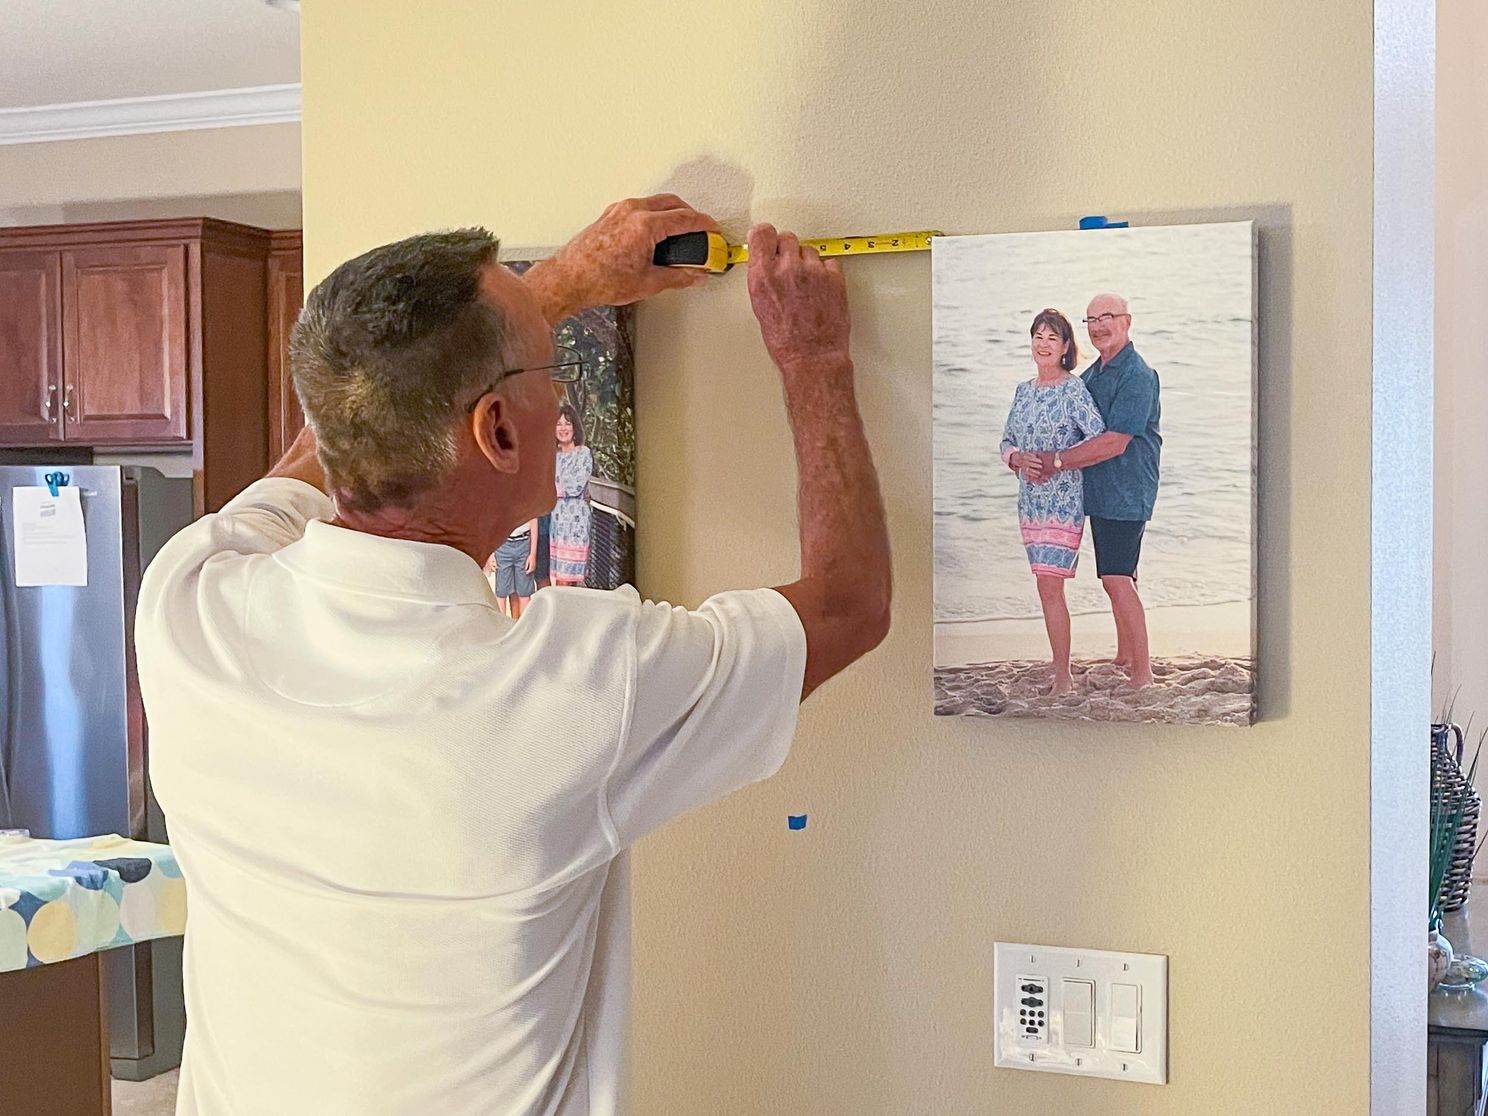 Mike measures and hangs wall art canvases for client in their home